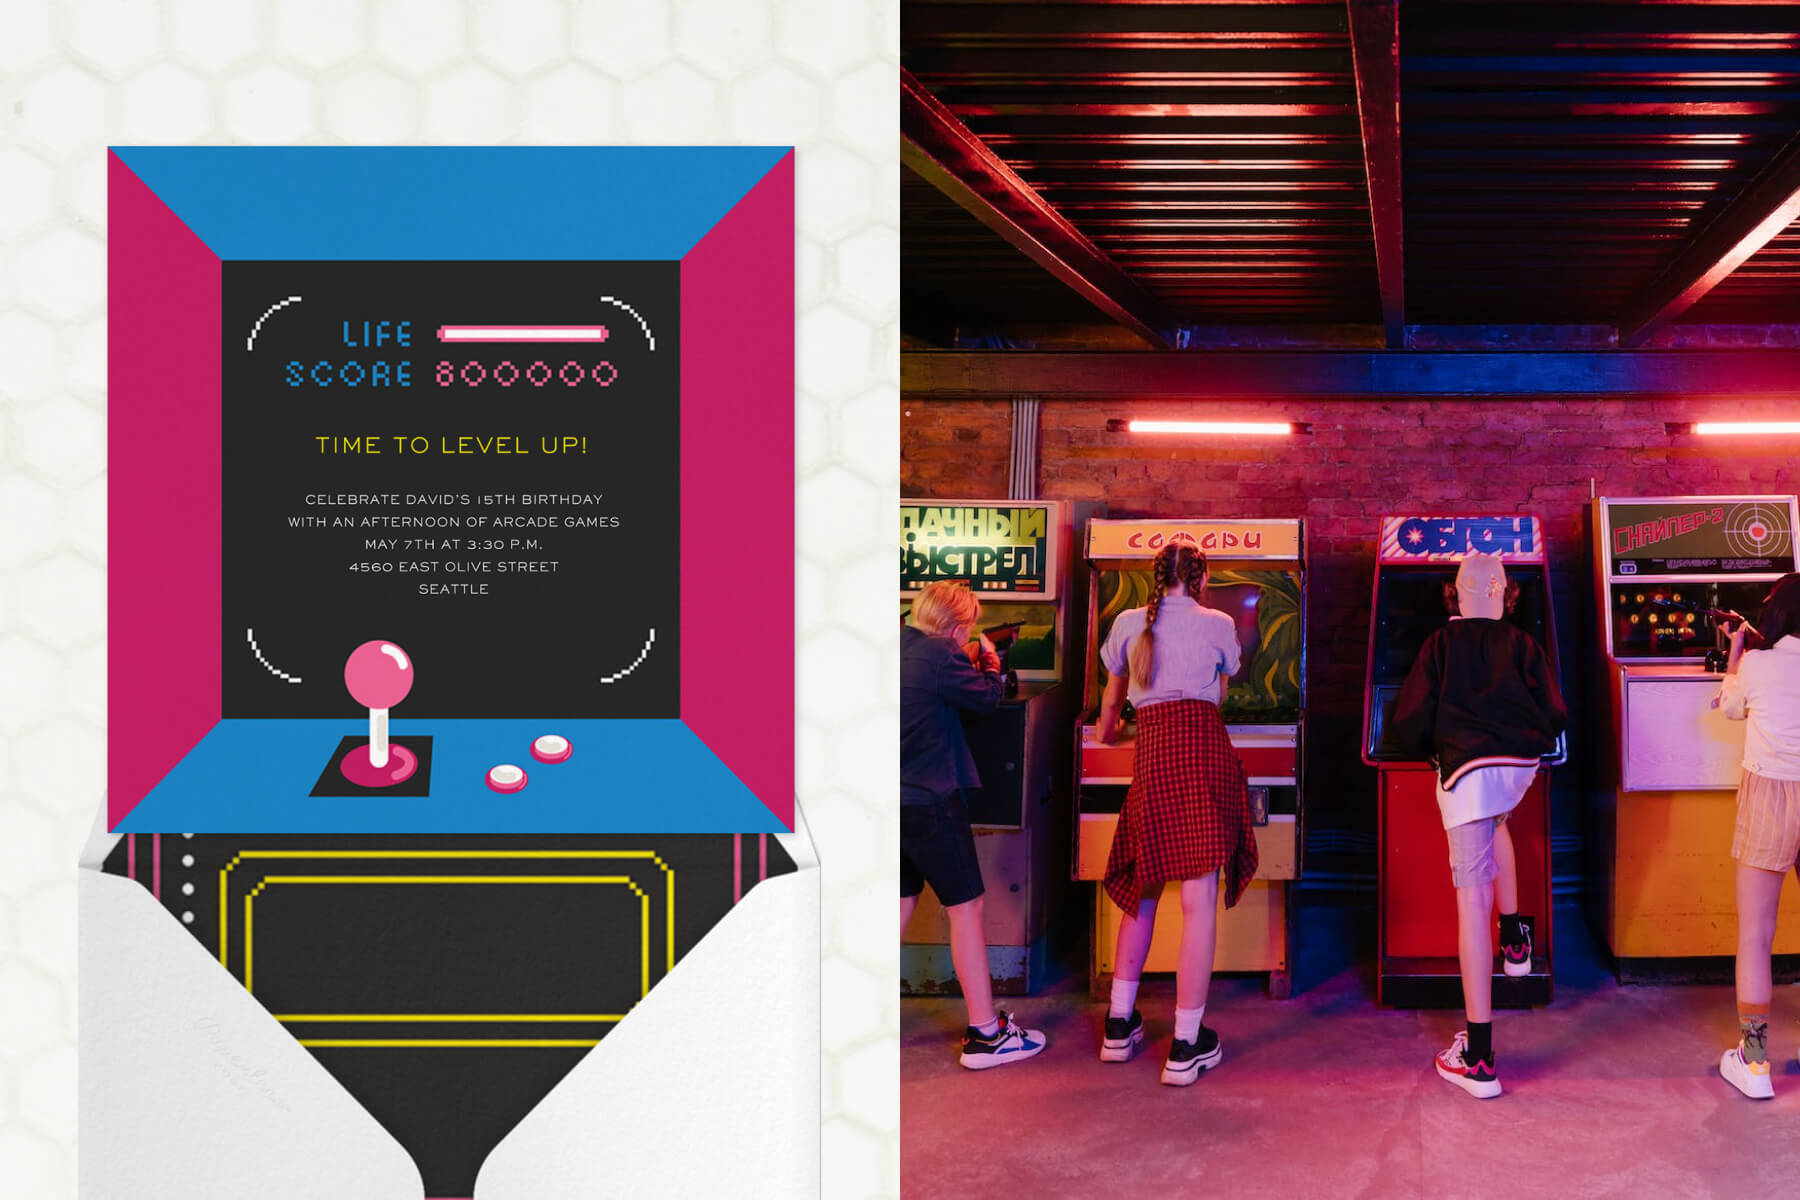 Left: A blue and pink invitation that looks like an arcade console; right: kids playing vintage arcade games.